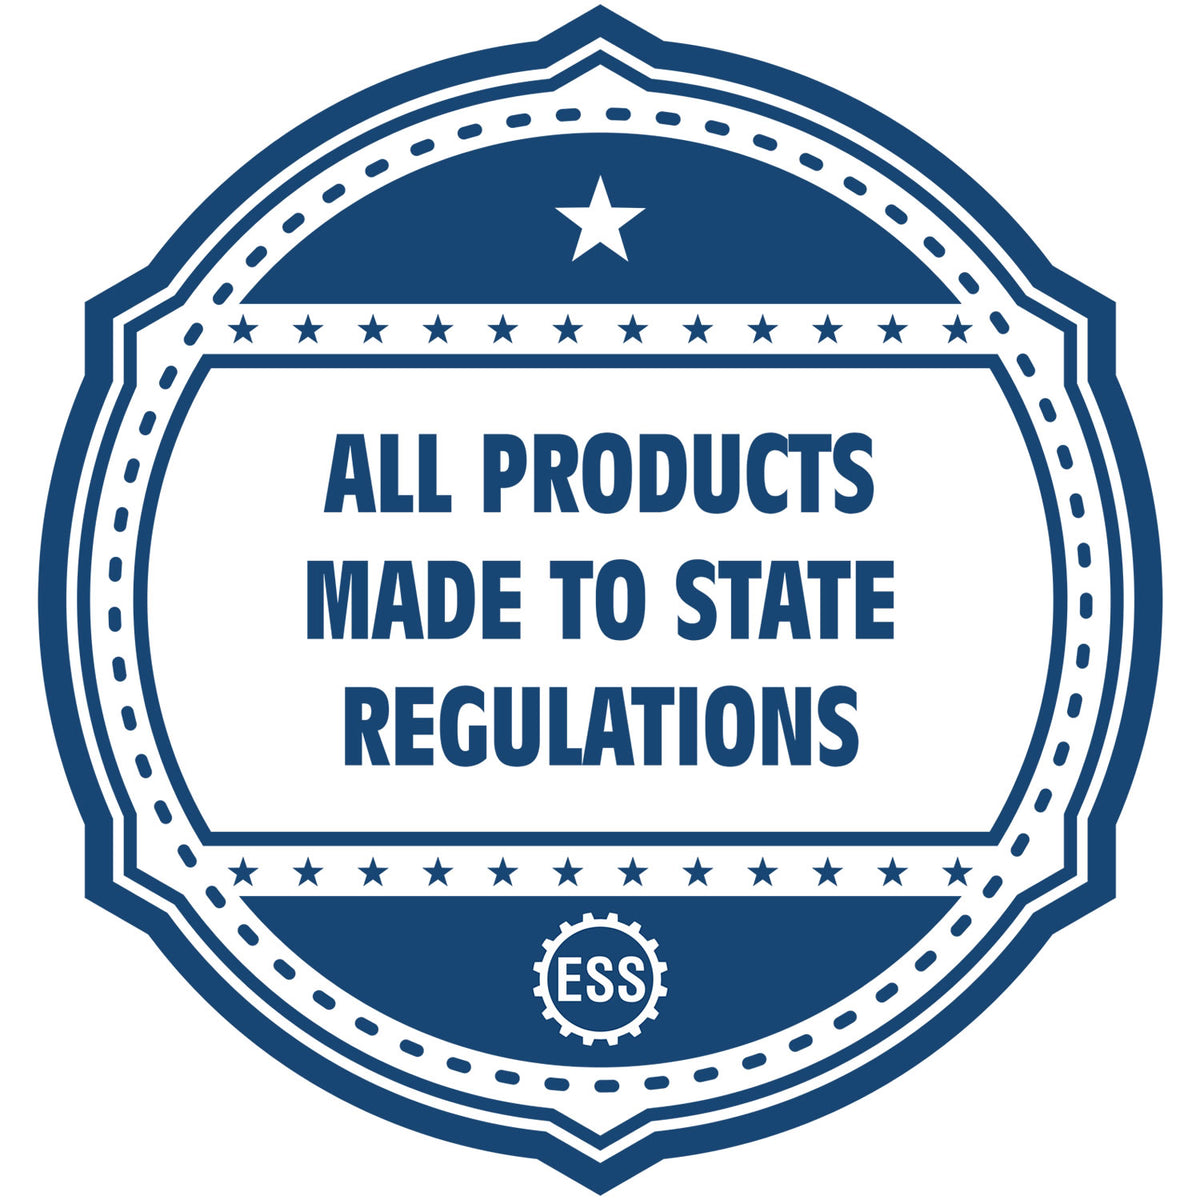 An icon or badge element for the Michigan Engineer Desk Seal showing that this product is made in compliance with state regulations.